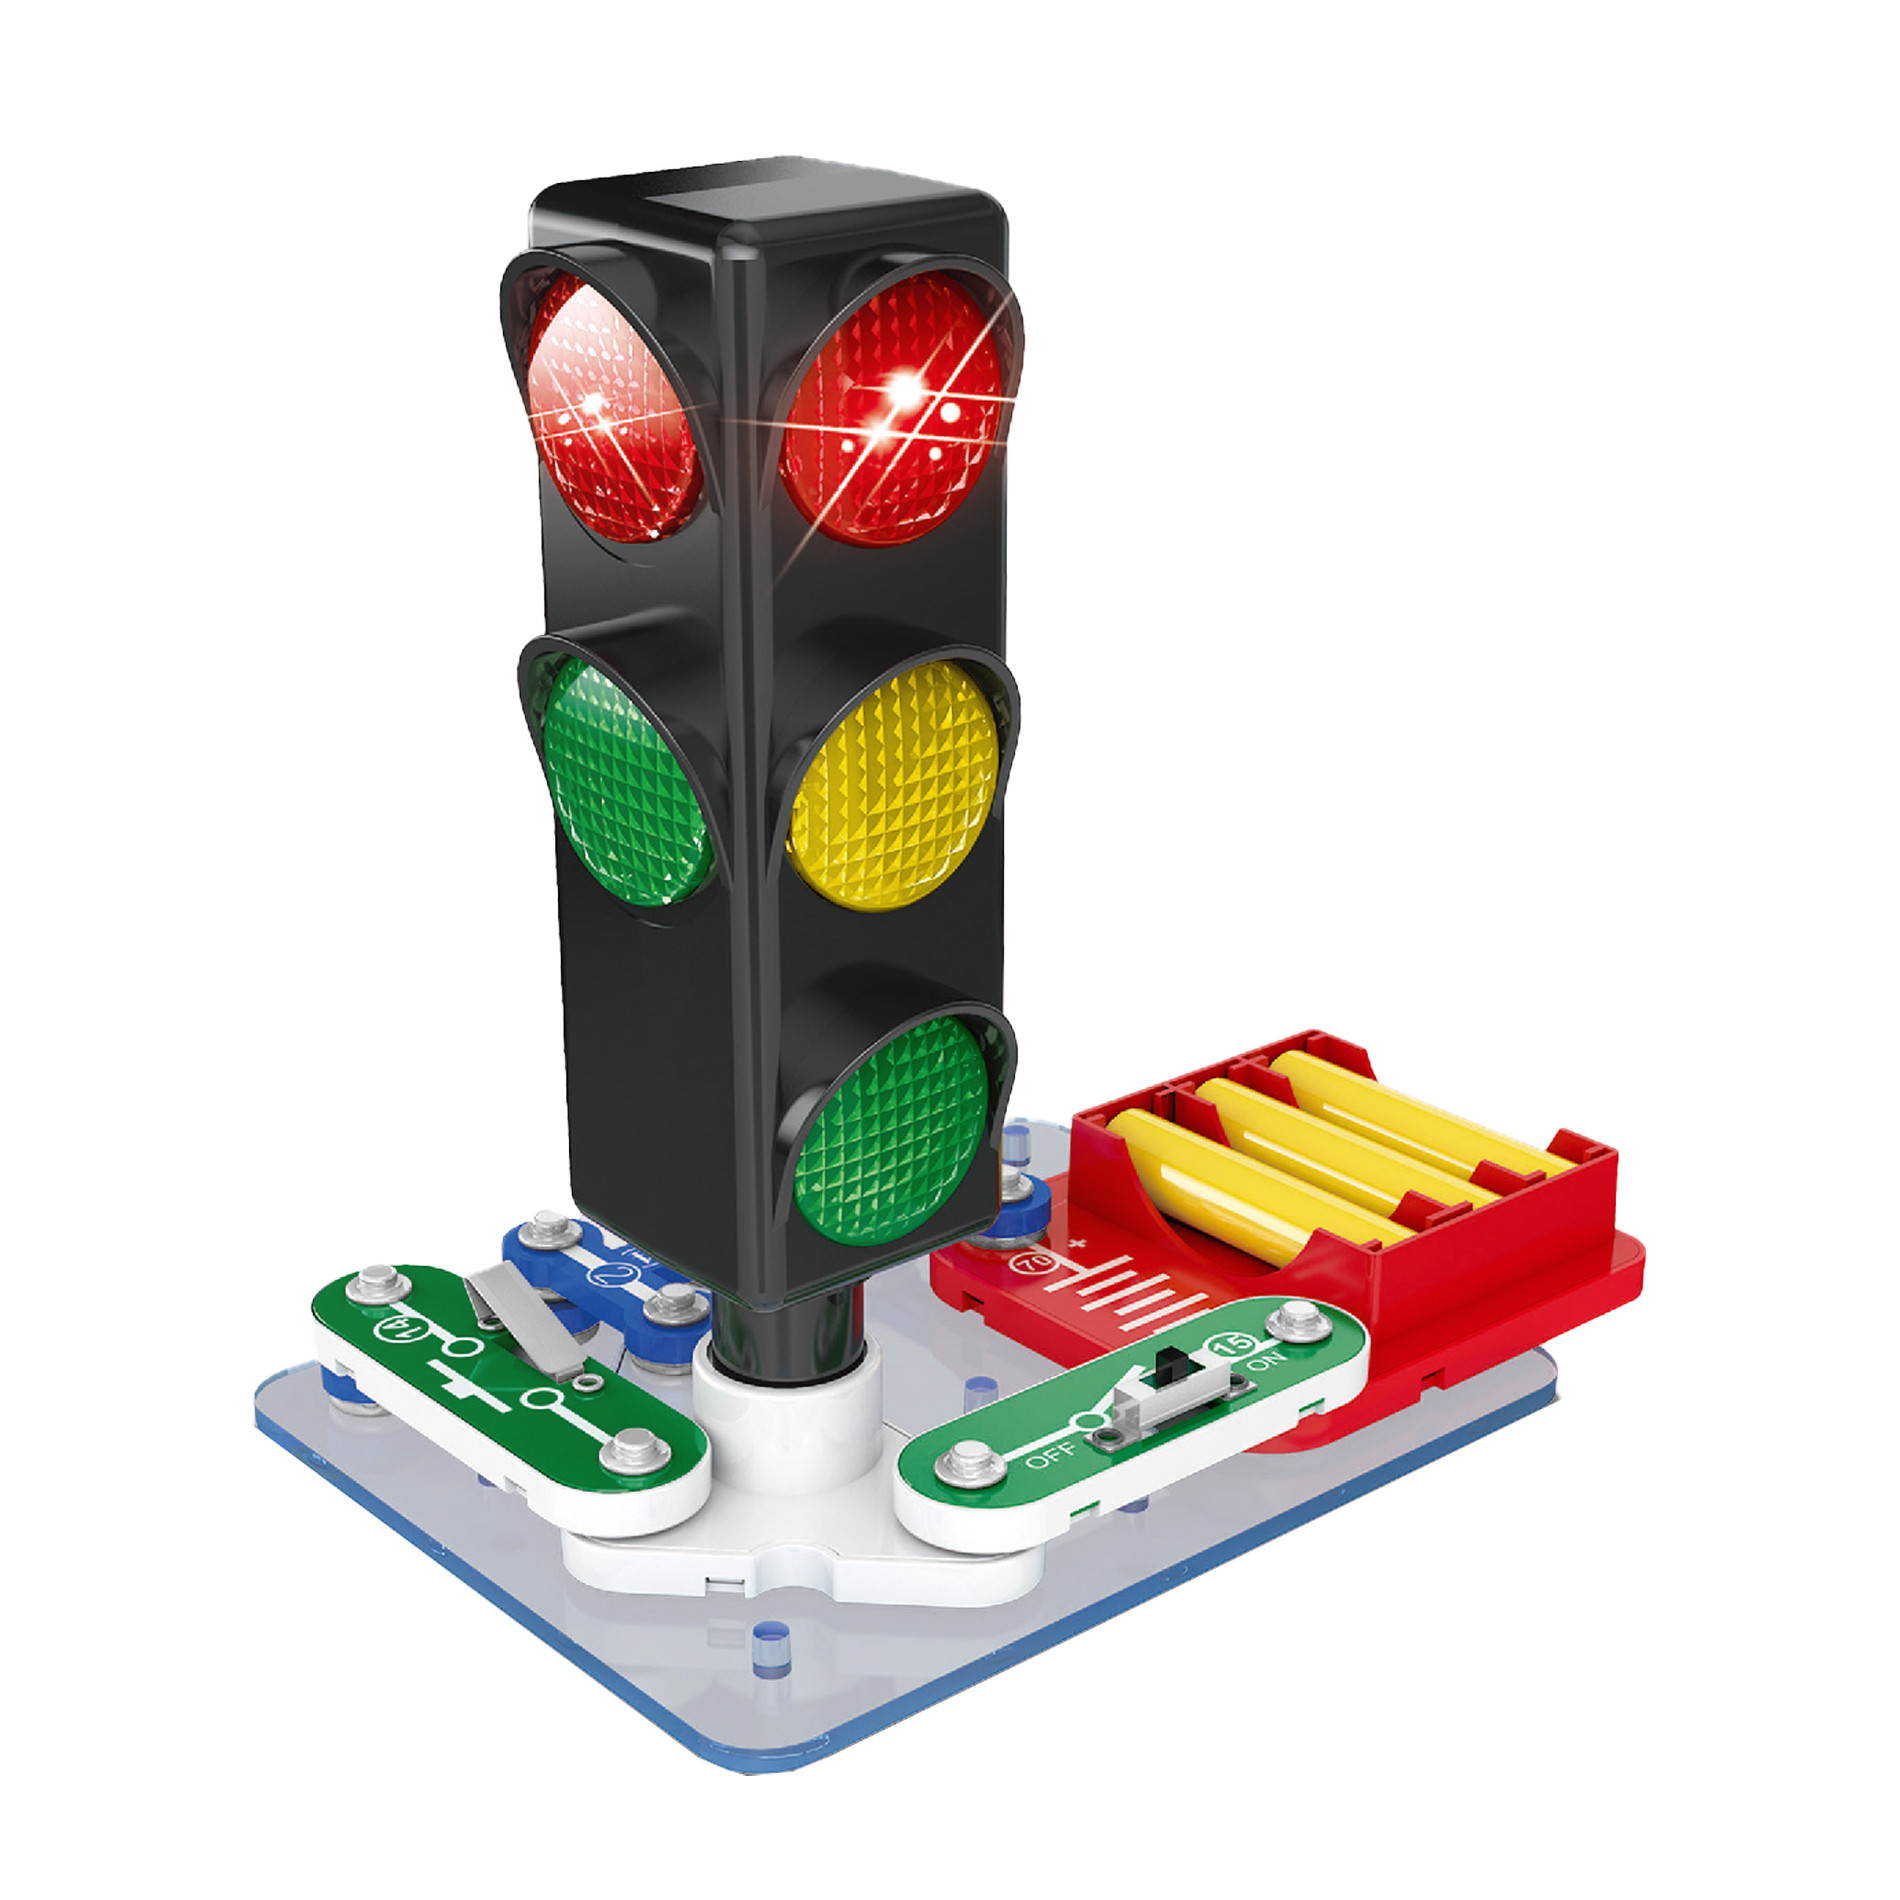 Educational traffic light with lights